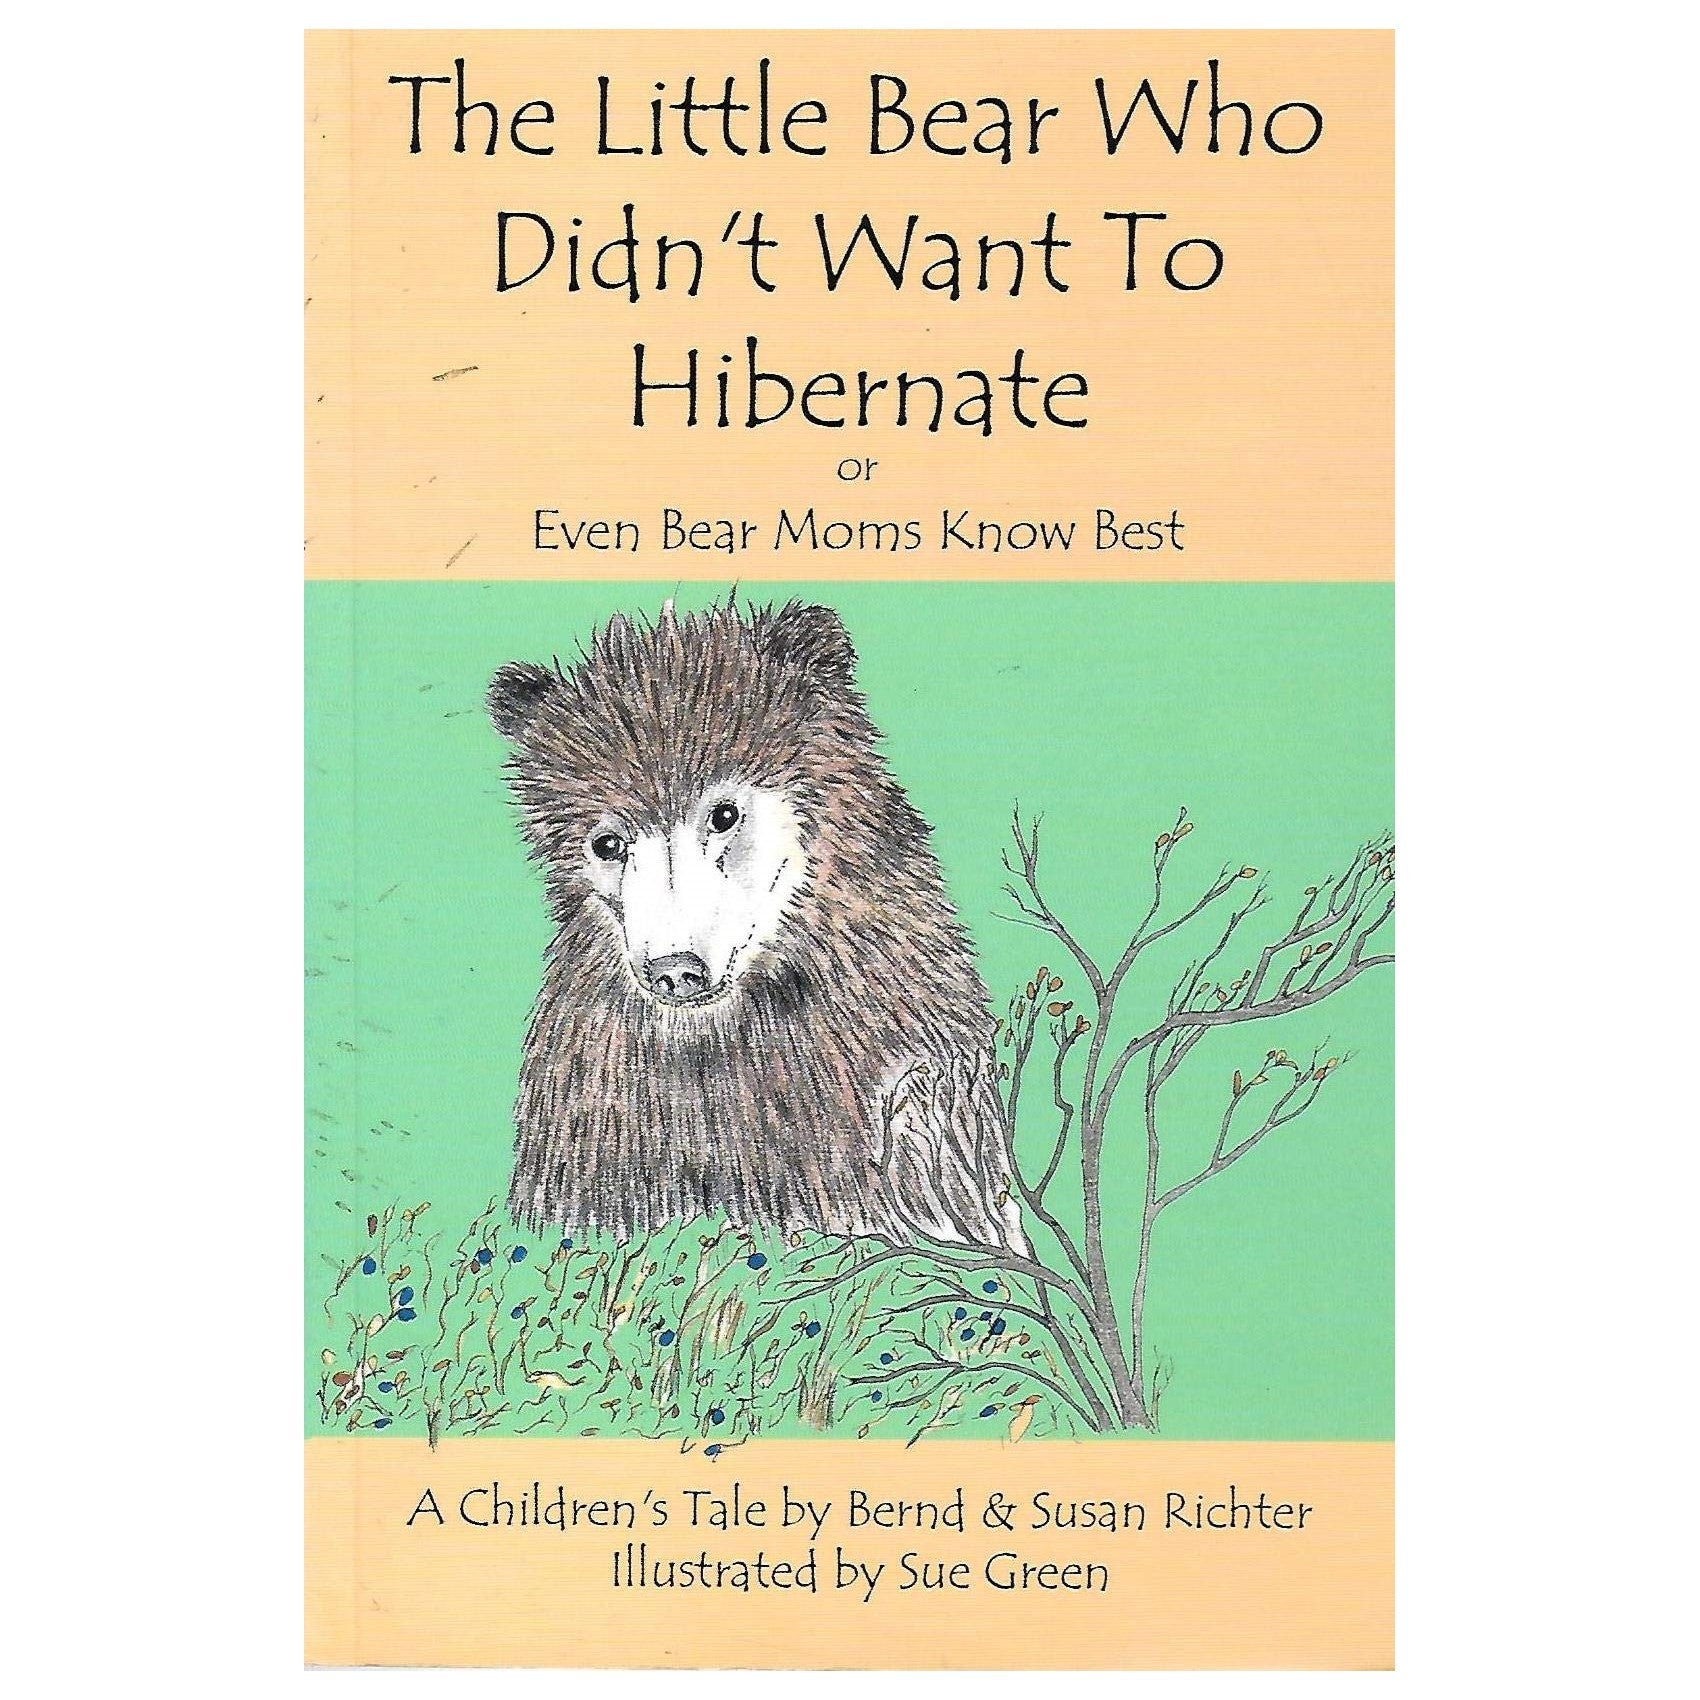 The Little Bear Who Didn't Want To Hibernate